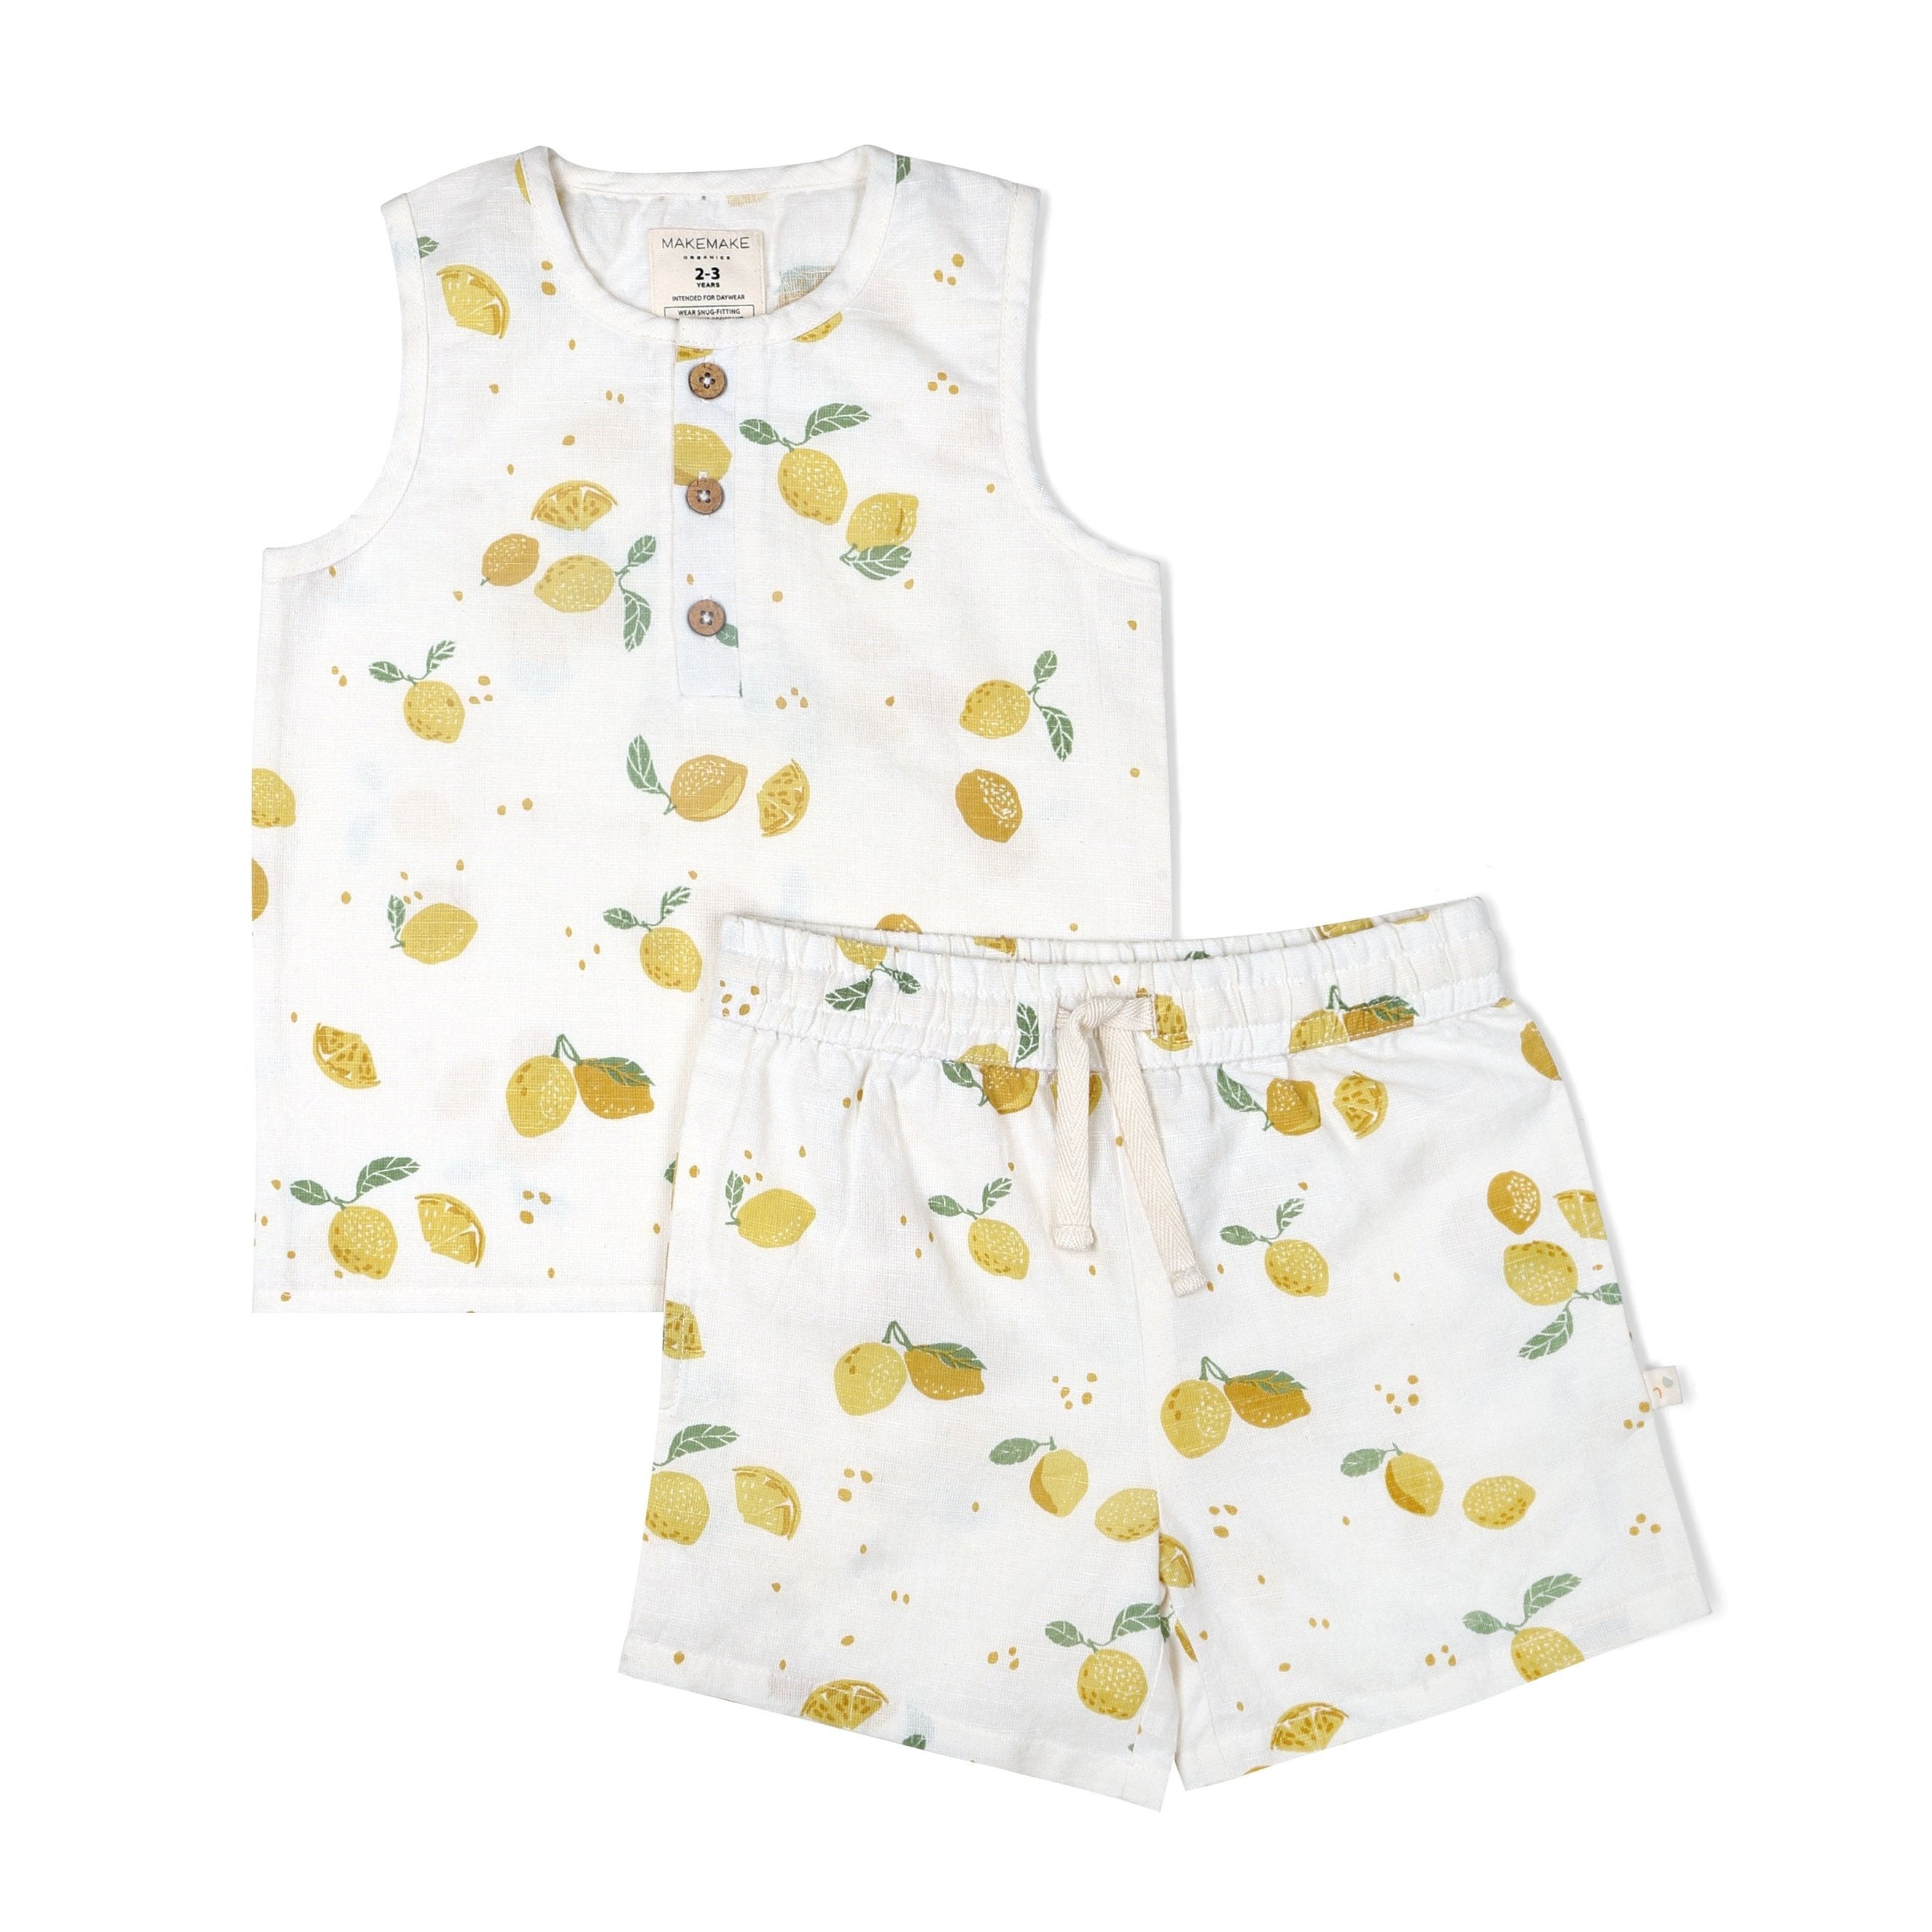 Toddler's two-piece sleepwear set featuring a sleeveless top and shorts, adorned with a yellow lemon print on a white background: Makemake Organics' Organic Linen Tank and Shorts Set - Citron.